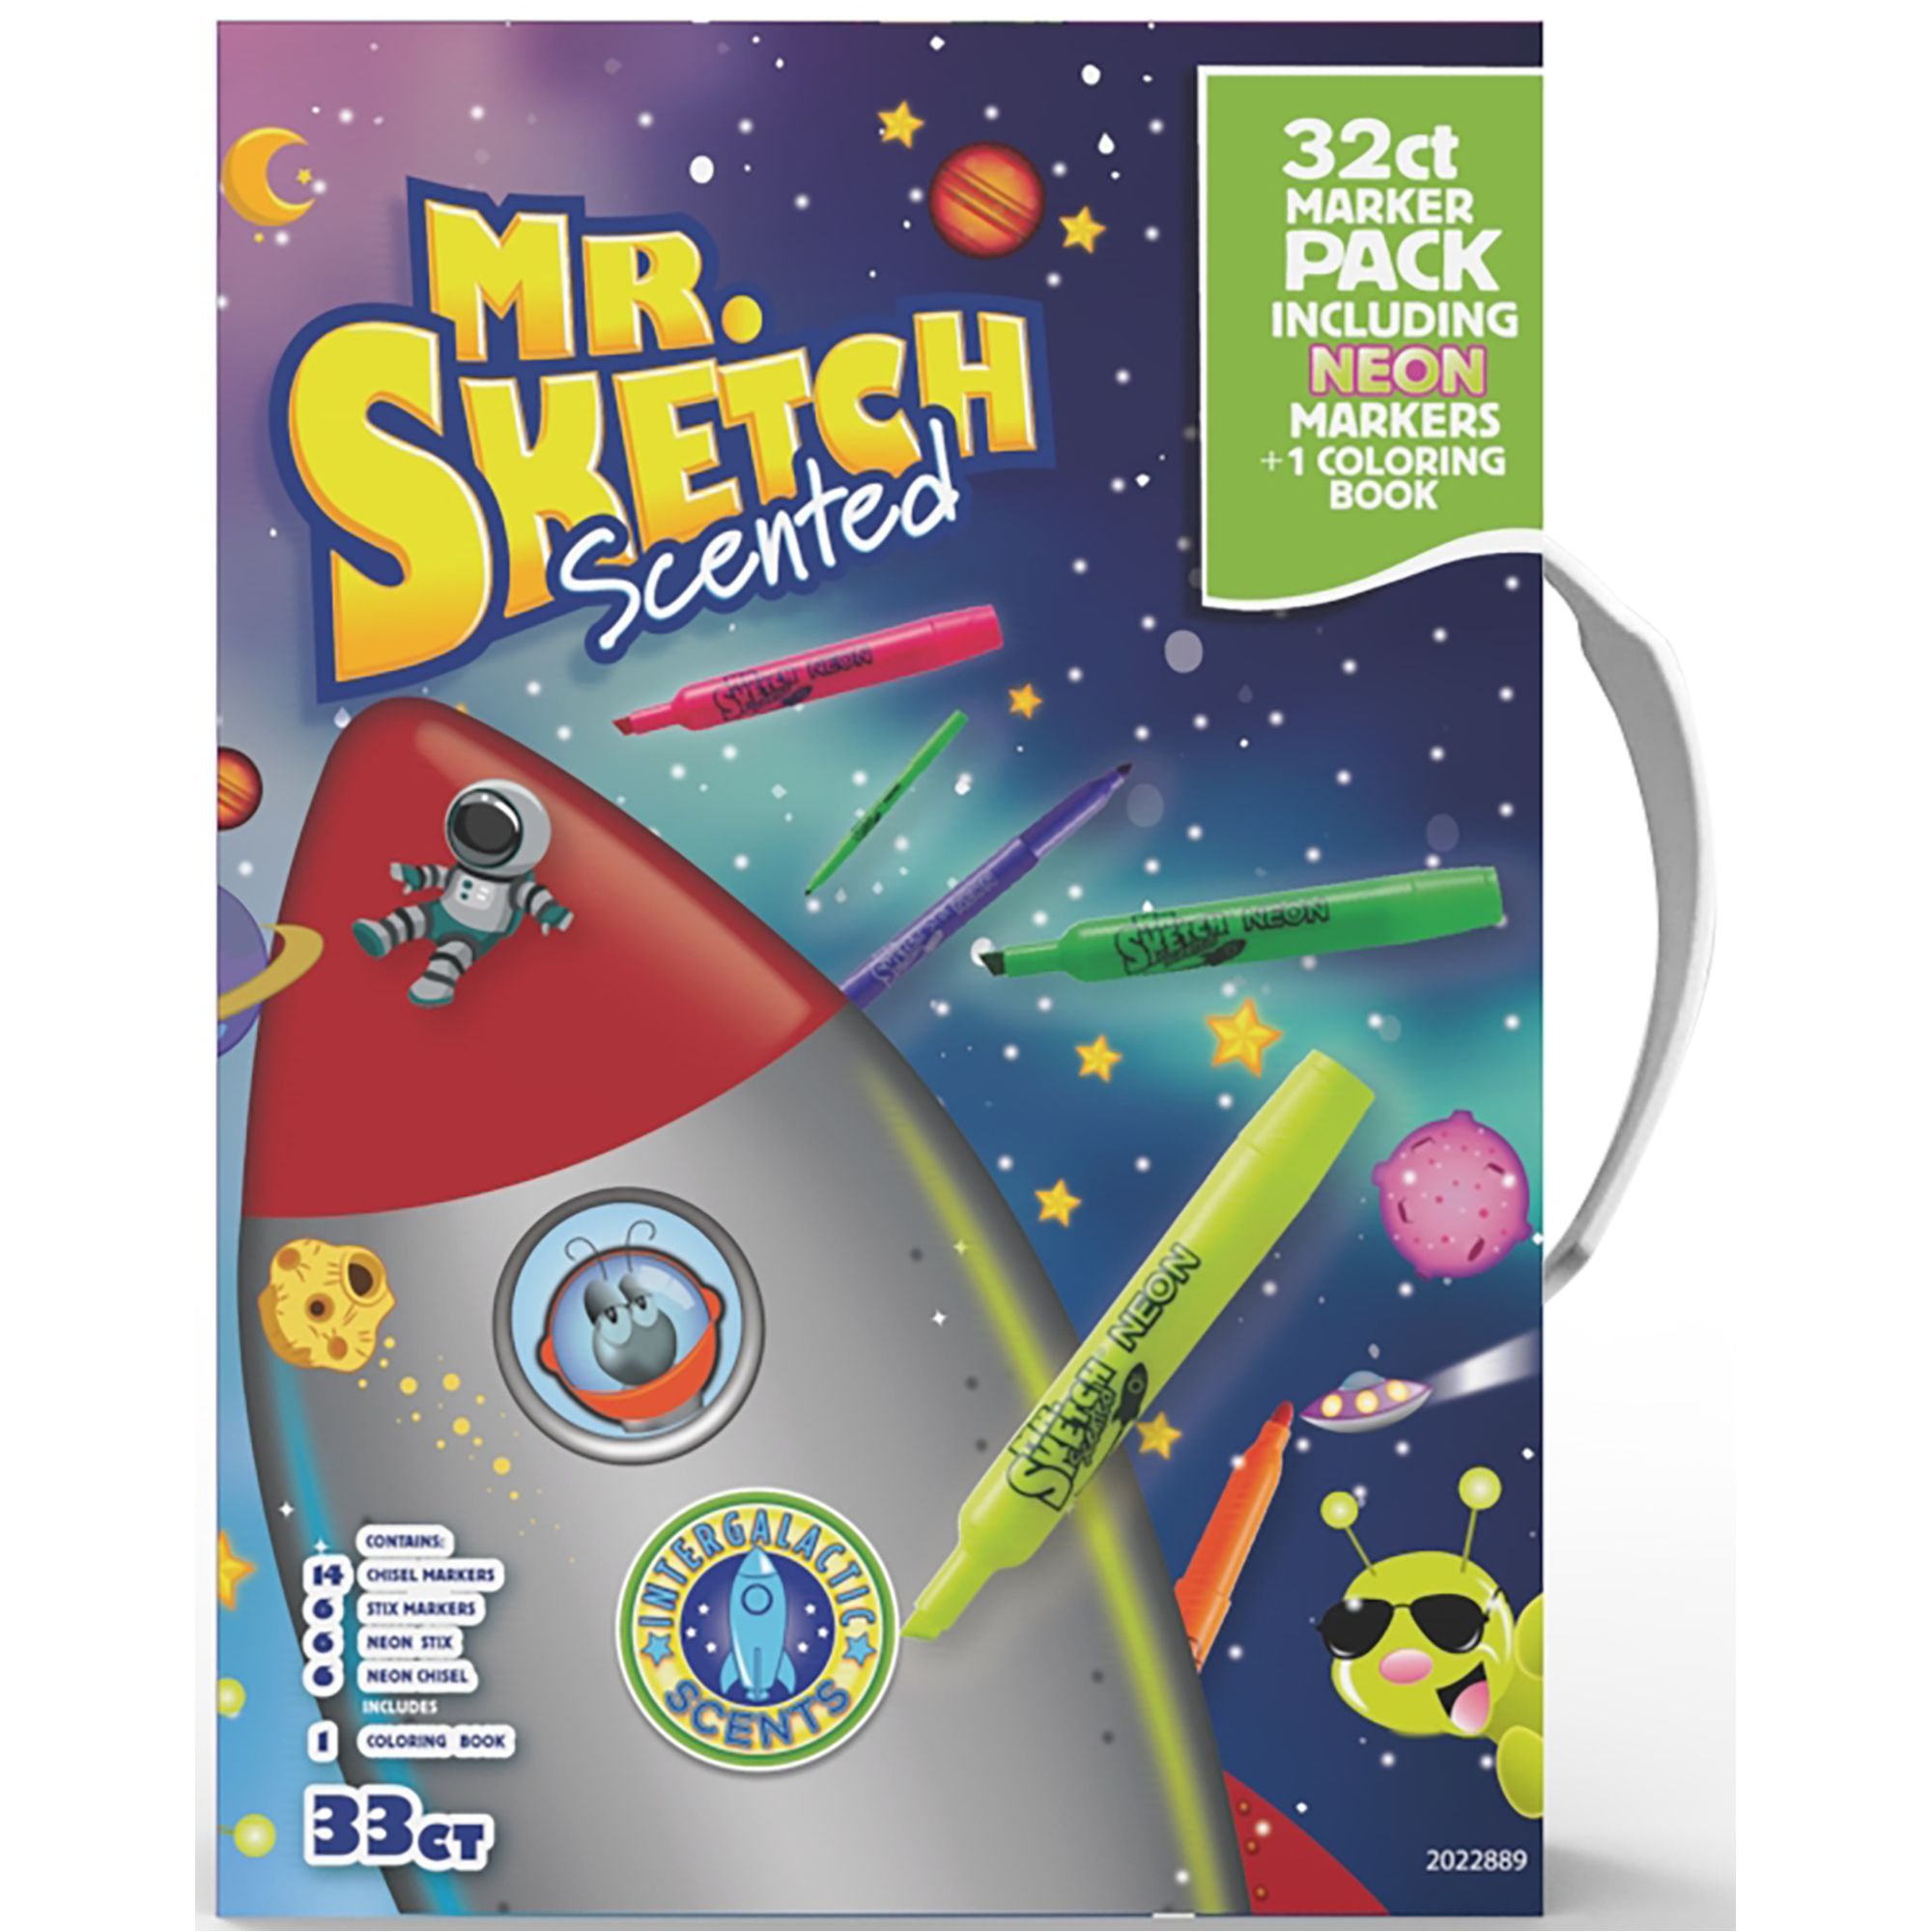 Mr. Sketch 2022889 Scented Markers Intergalactic Neon Coloring Kit with ...